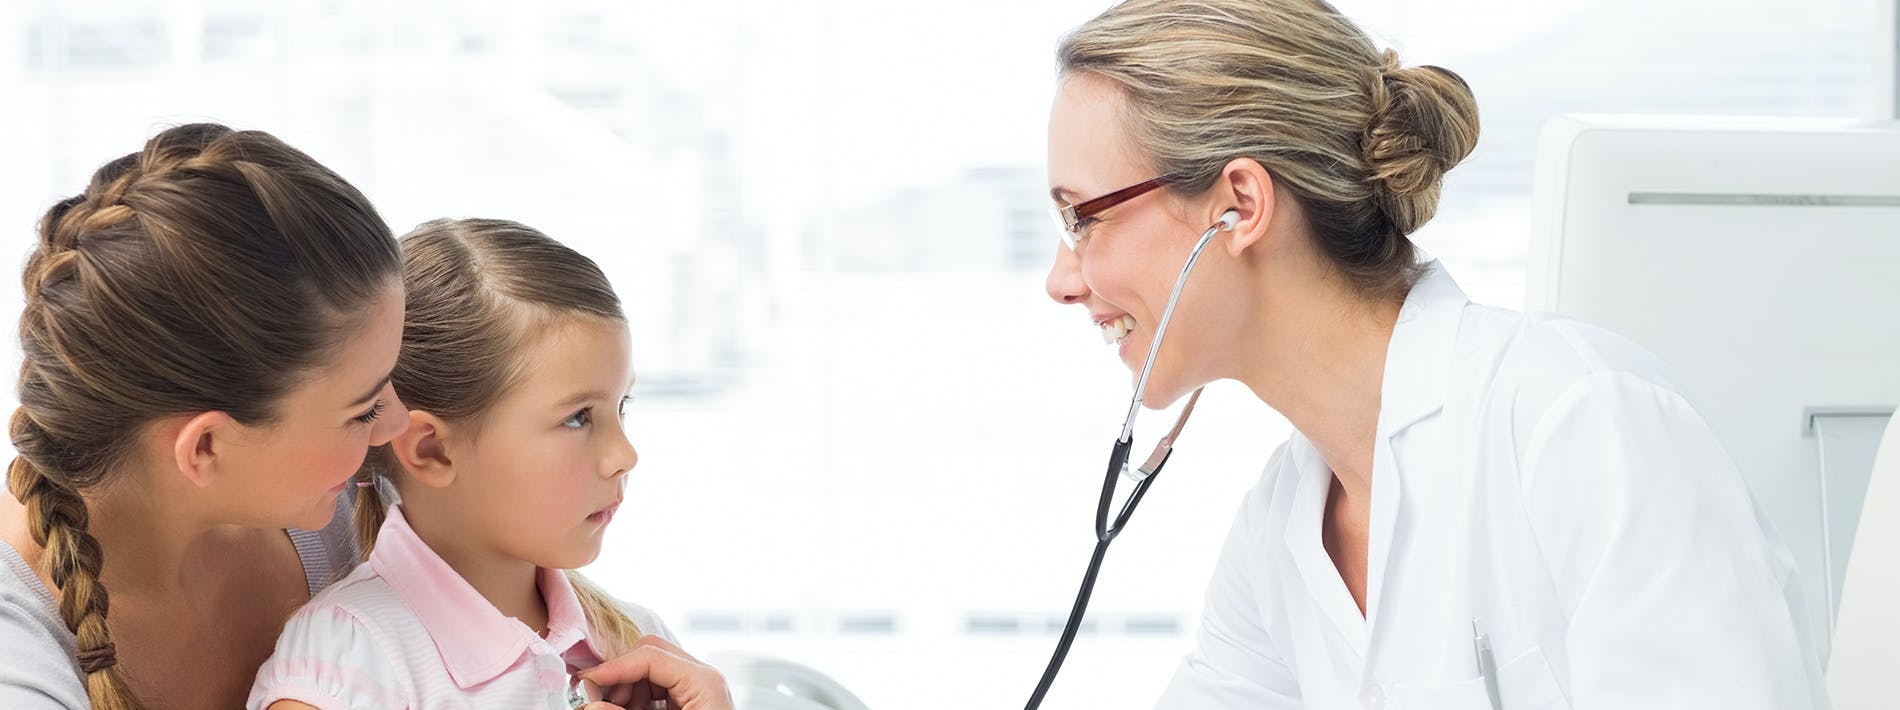 Doctor Checks Young Patient for Illness